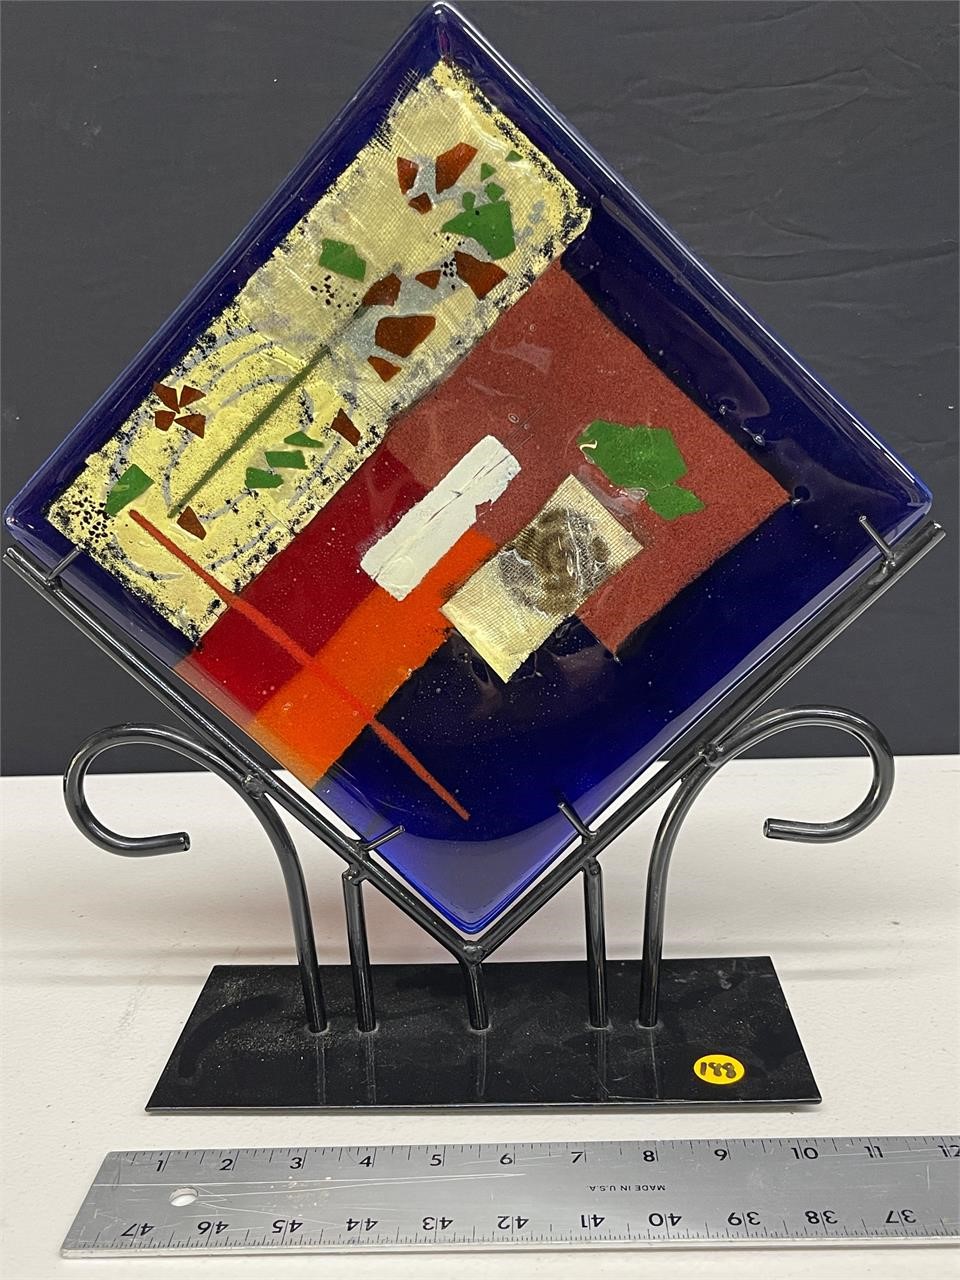 10 SQ IN ART BLOWN GLASS PLATTER ON STAND